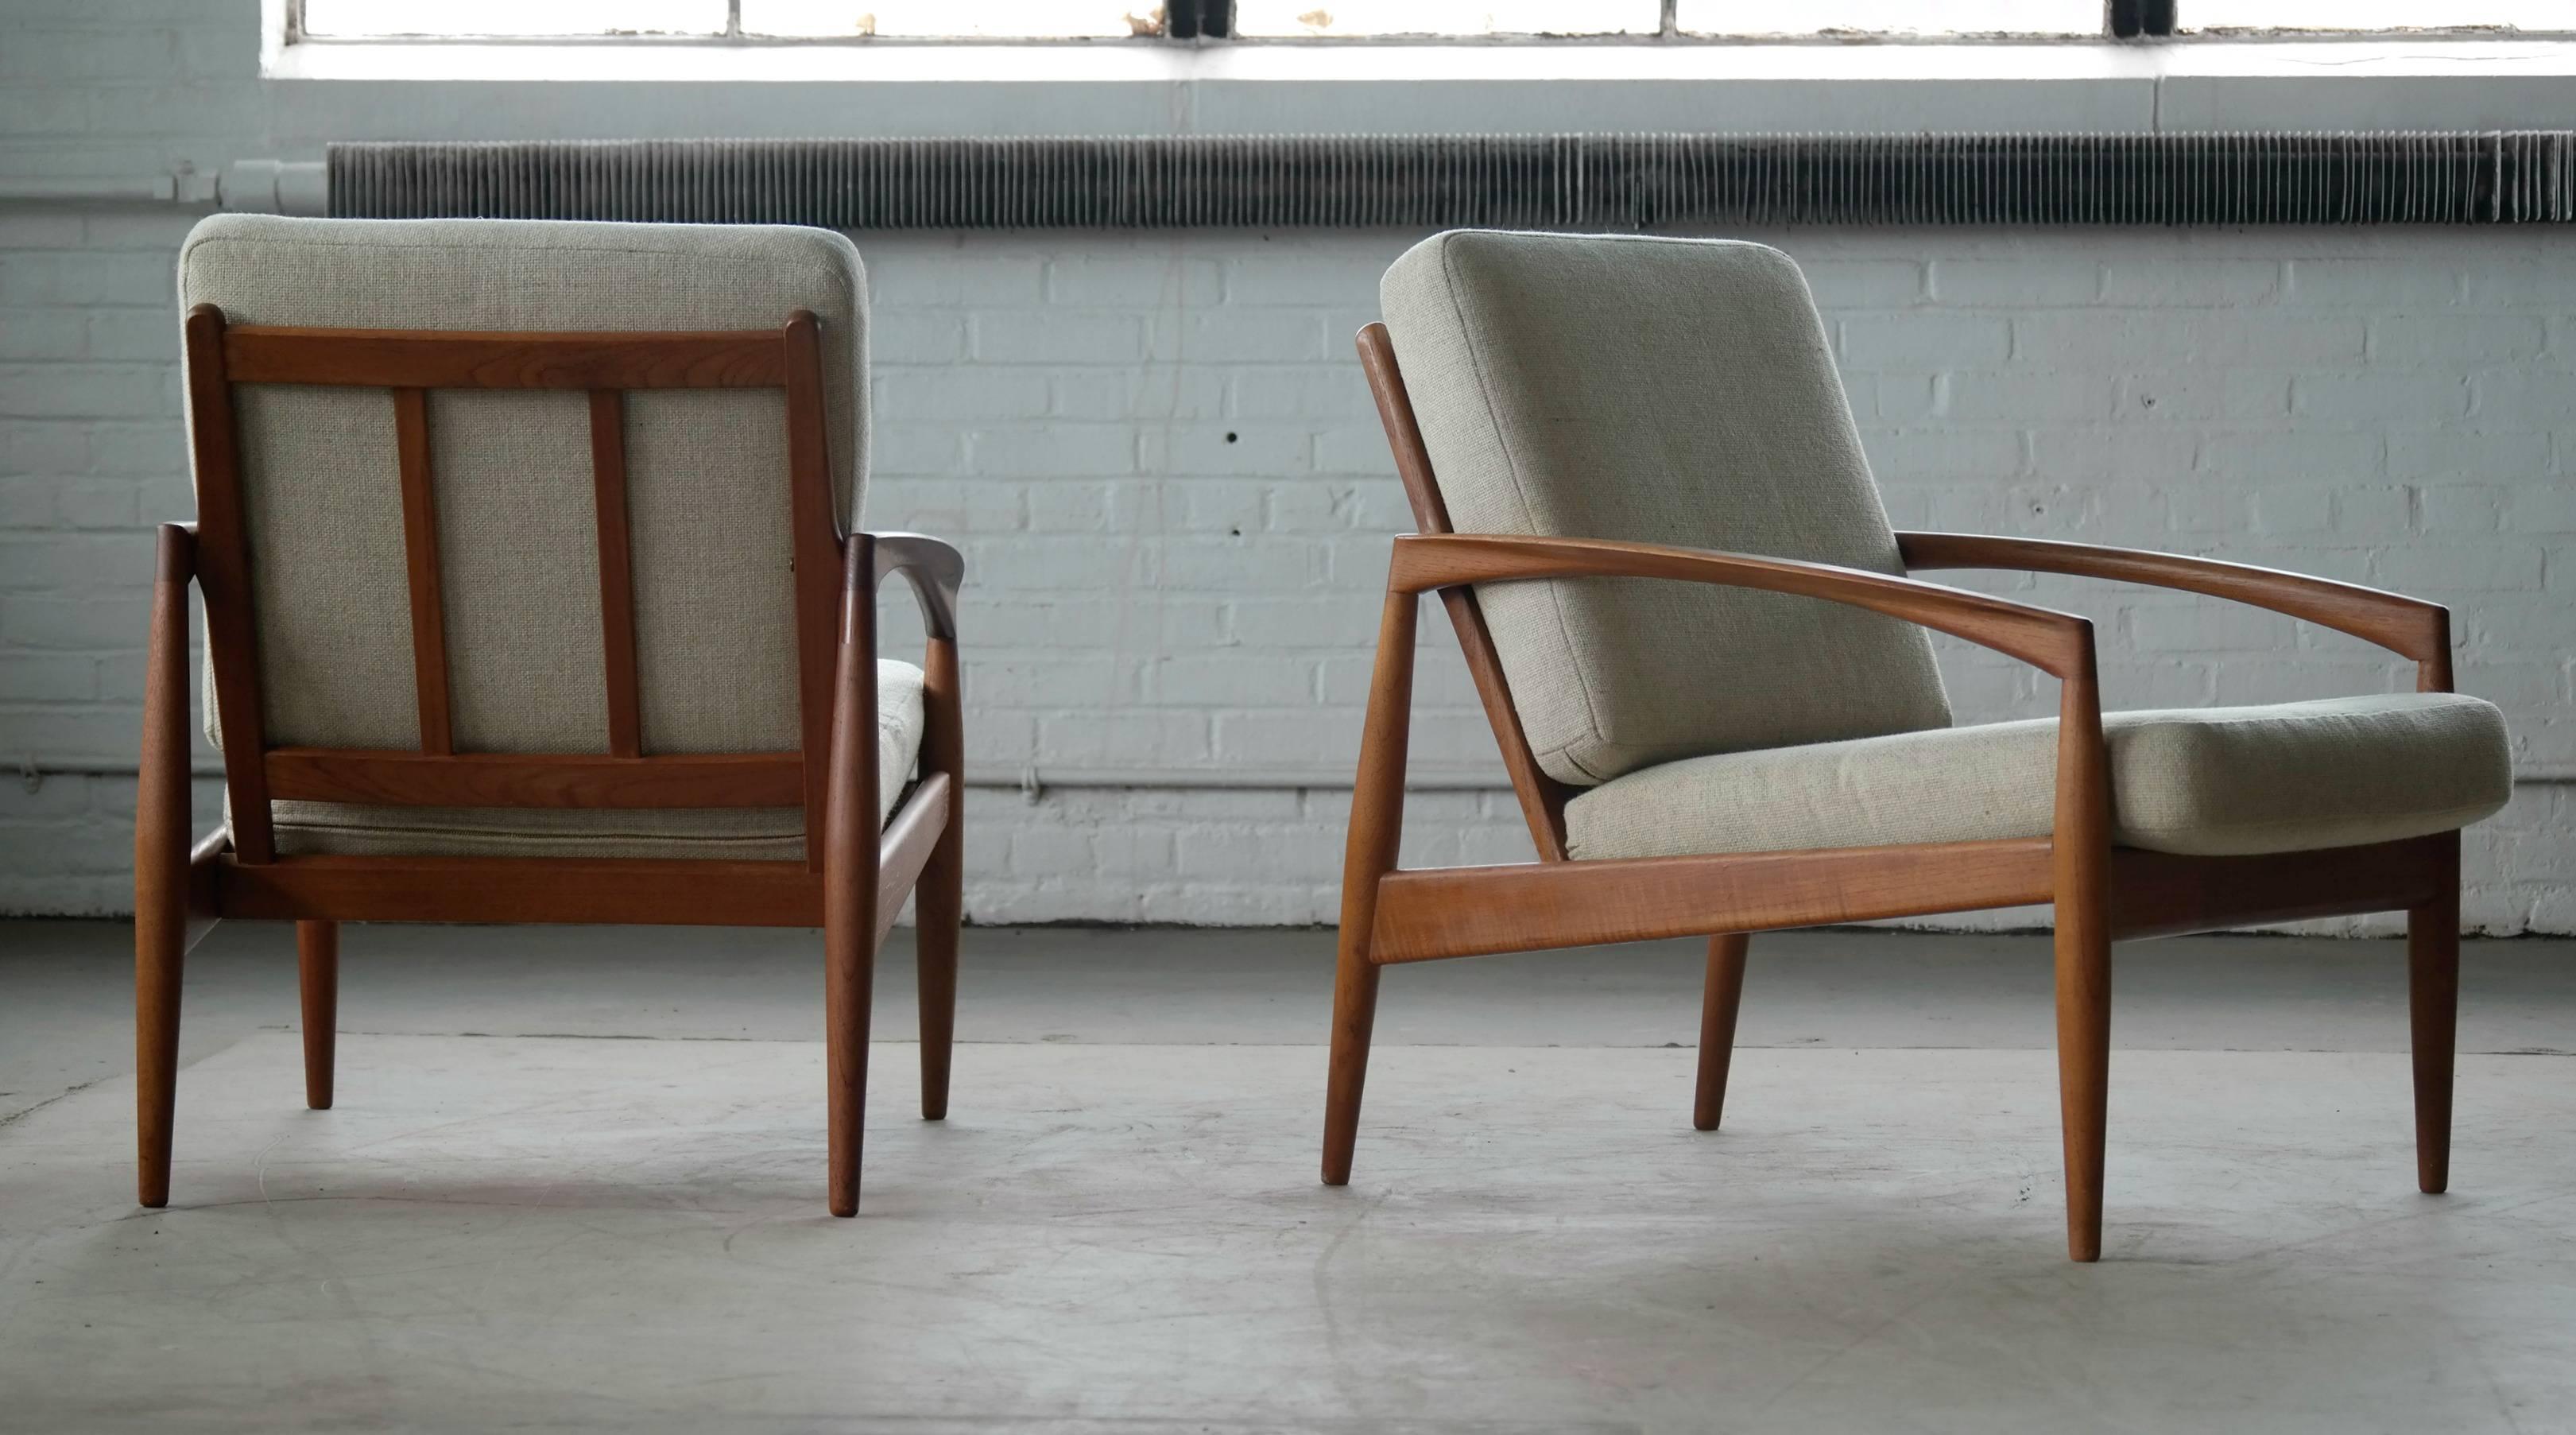 Beautiful pair of model 121 known as the paper knife teak easy chairs by Kai Kristiansen manufactured by Magnus Olesen, Denmark. Made of solid teak wood and is of superb quality. Great clean lines and amazing details. The chairs still have their